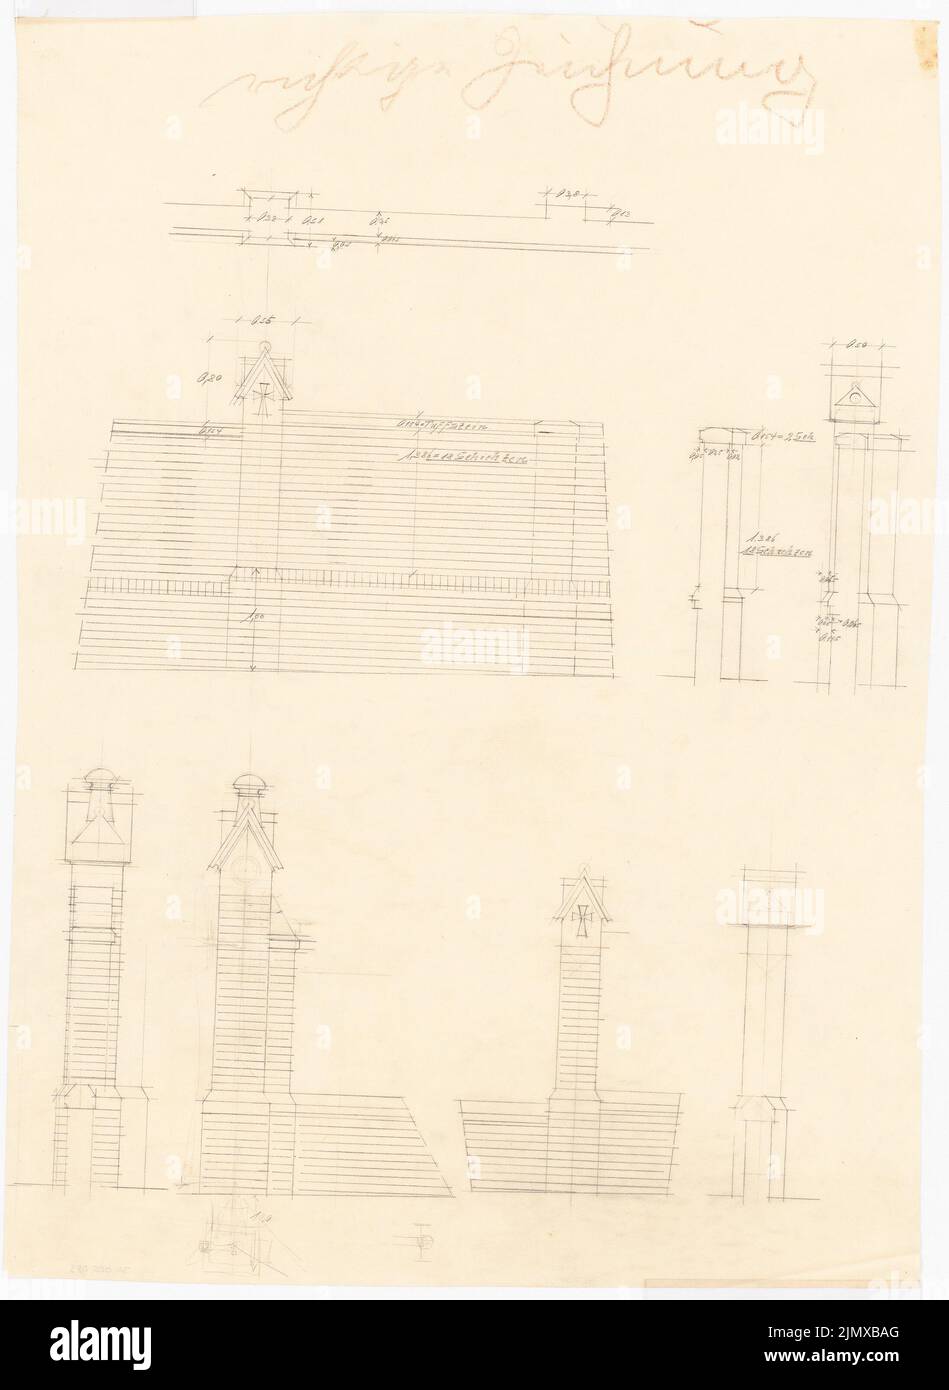 Klomp Johannes Franziskus (1865-1946), St. Francis (and expansion of Franciscan monastery), Dortmund (1900-1903): Details of the fencing of the church and monastery (masonry and pillar), views, cuts and floor plan (1:20). Pencil on transparent, 62.3 x 45.6 cm (including scan edges) Klomp Johannes Franziskus  (1865-1946): St. Franziskus (und Erweiterung Franziskanerkloster), Dortmund Stock Photo